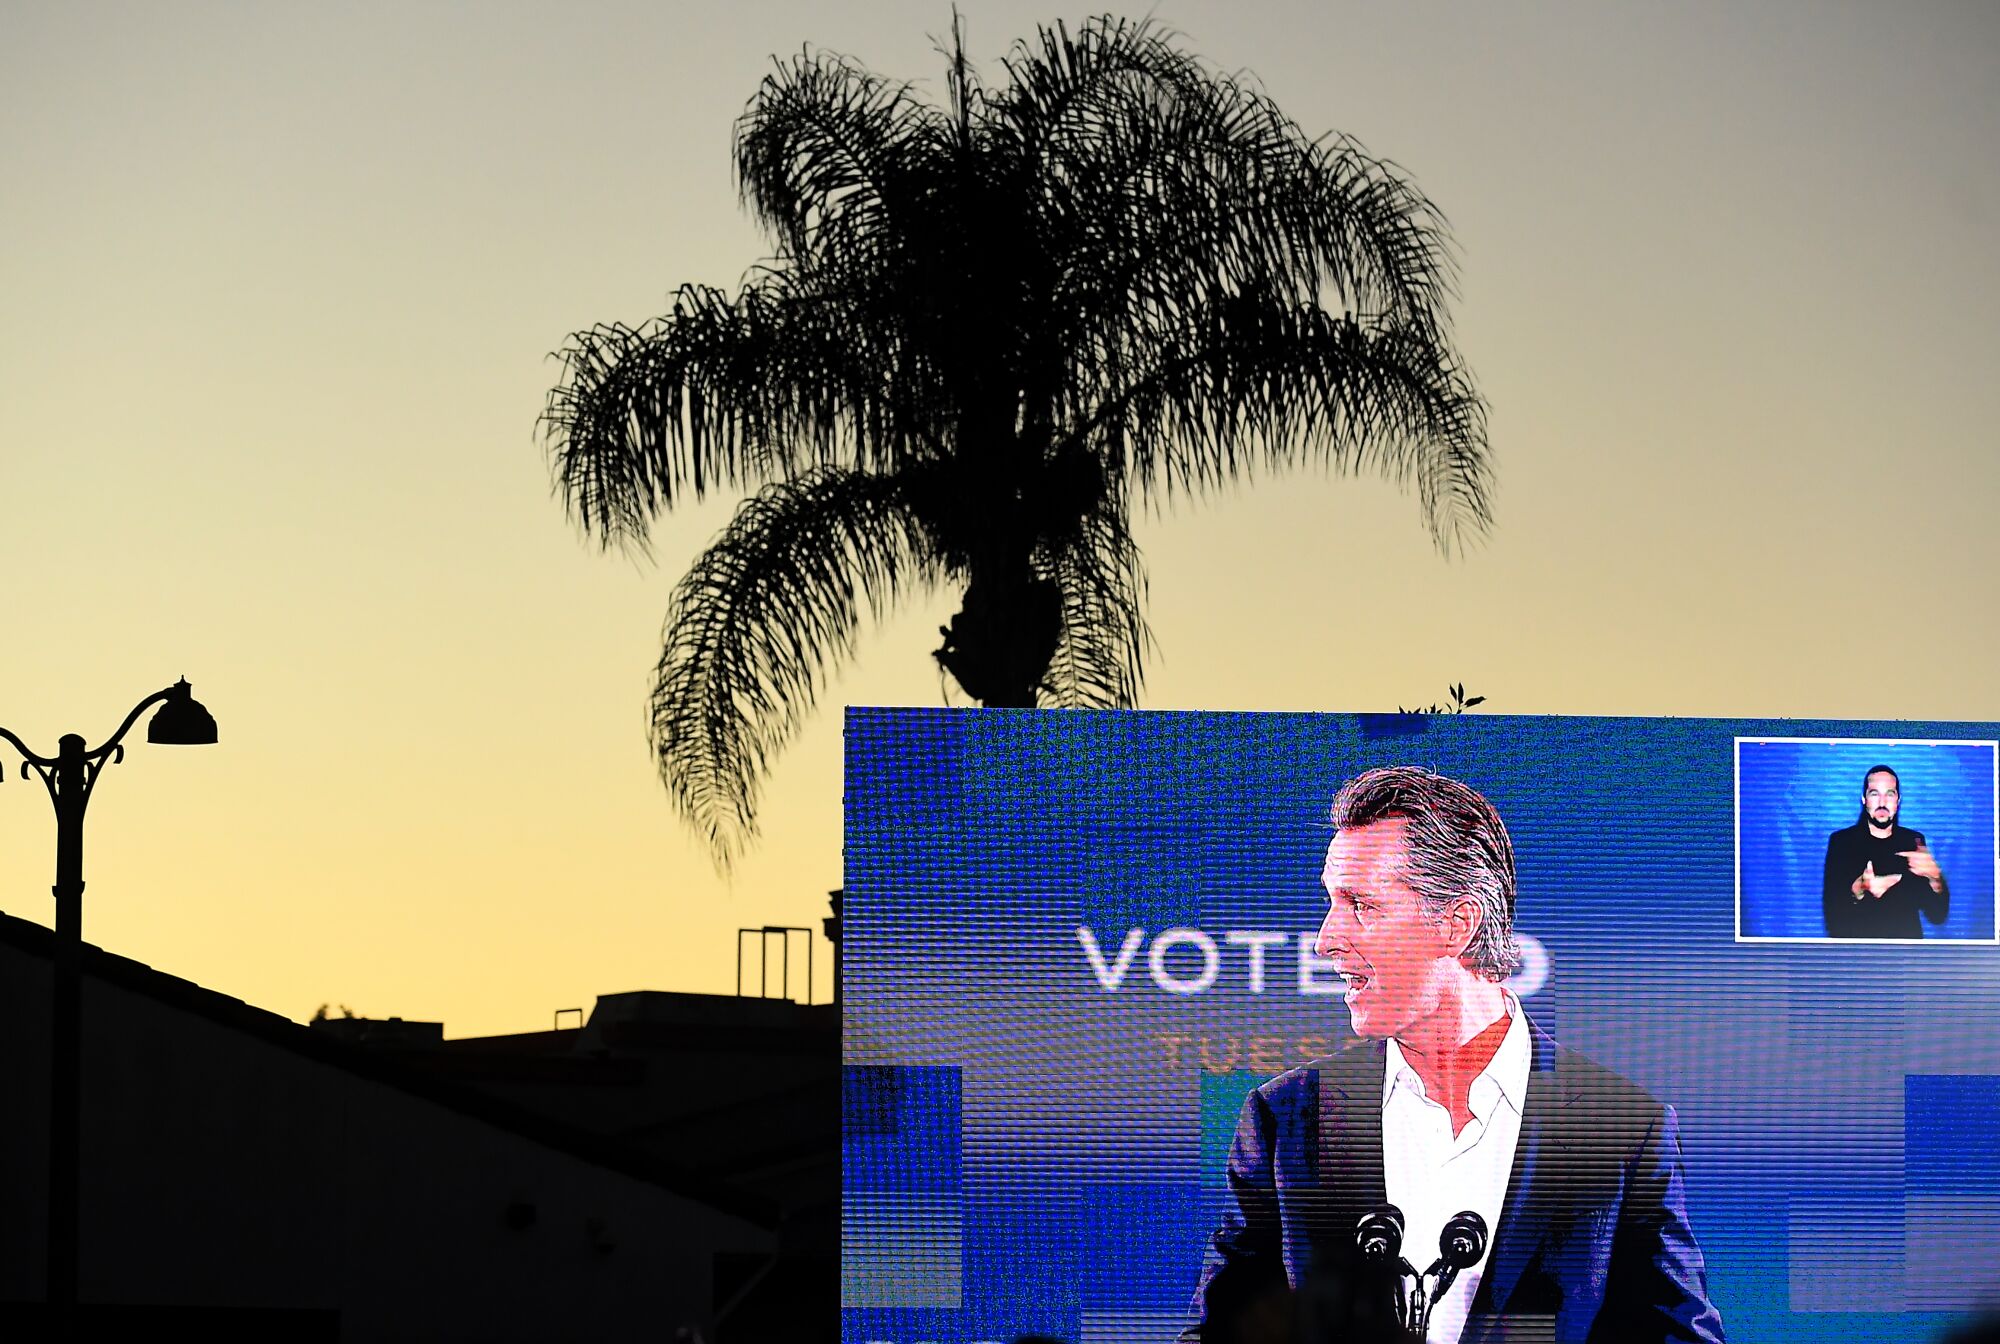 California Gov. Gavin Newsom is seen on a large outdoor monitor in the evening, with an inset image of a person signing.